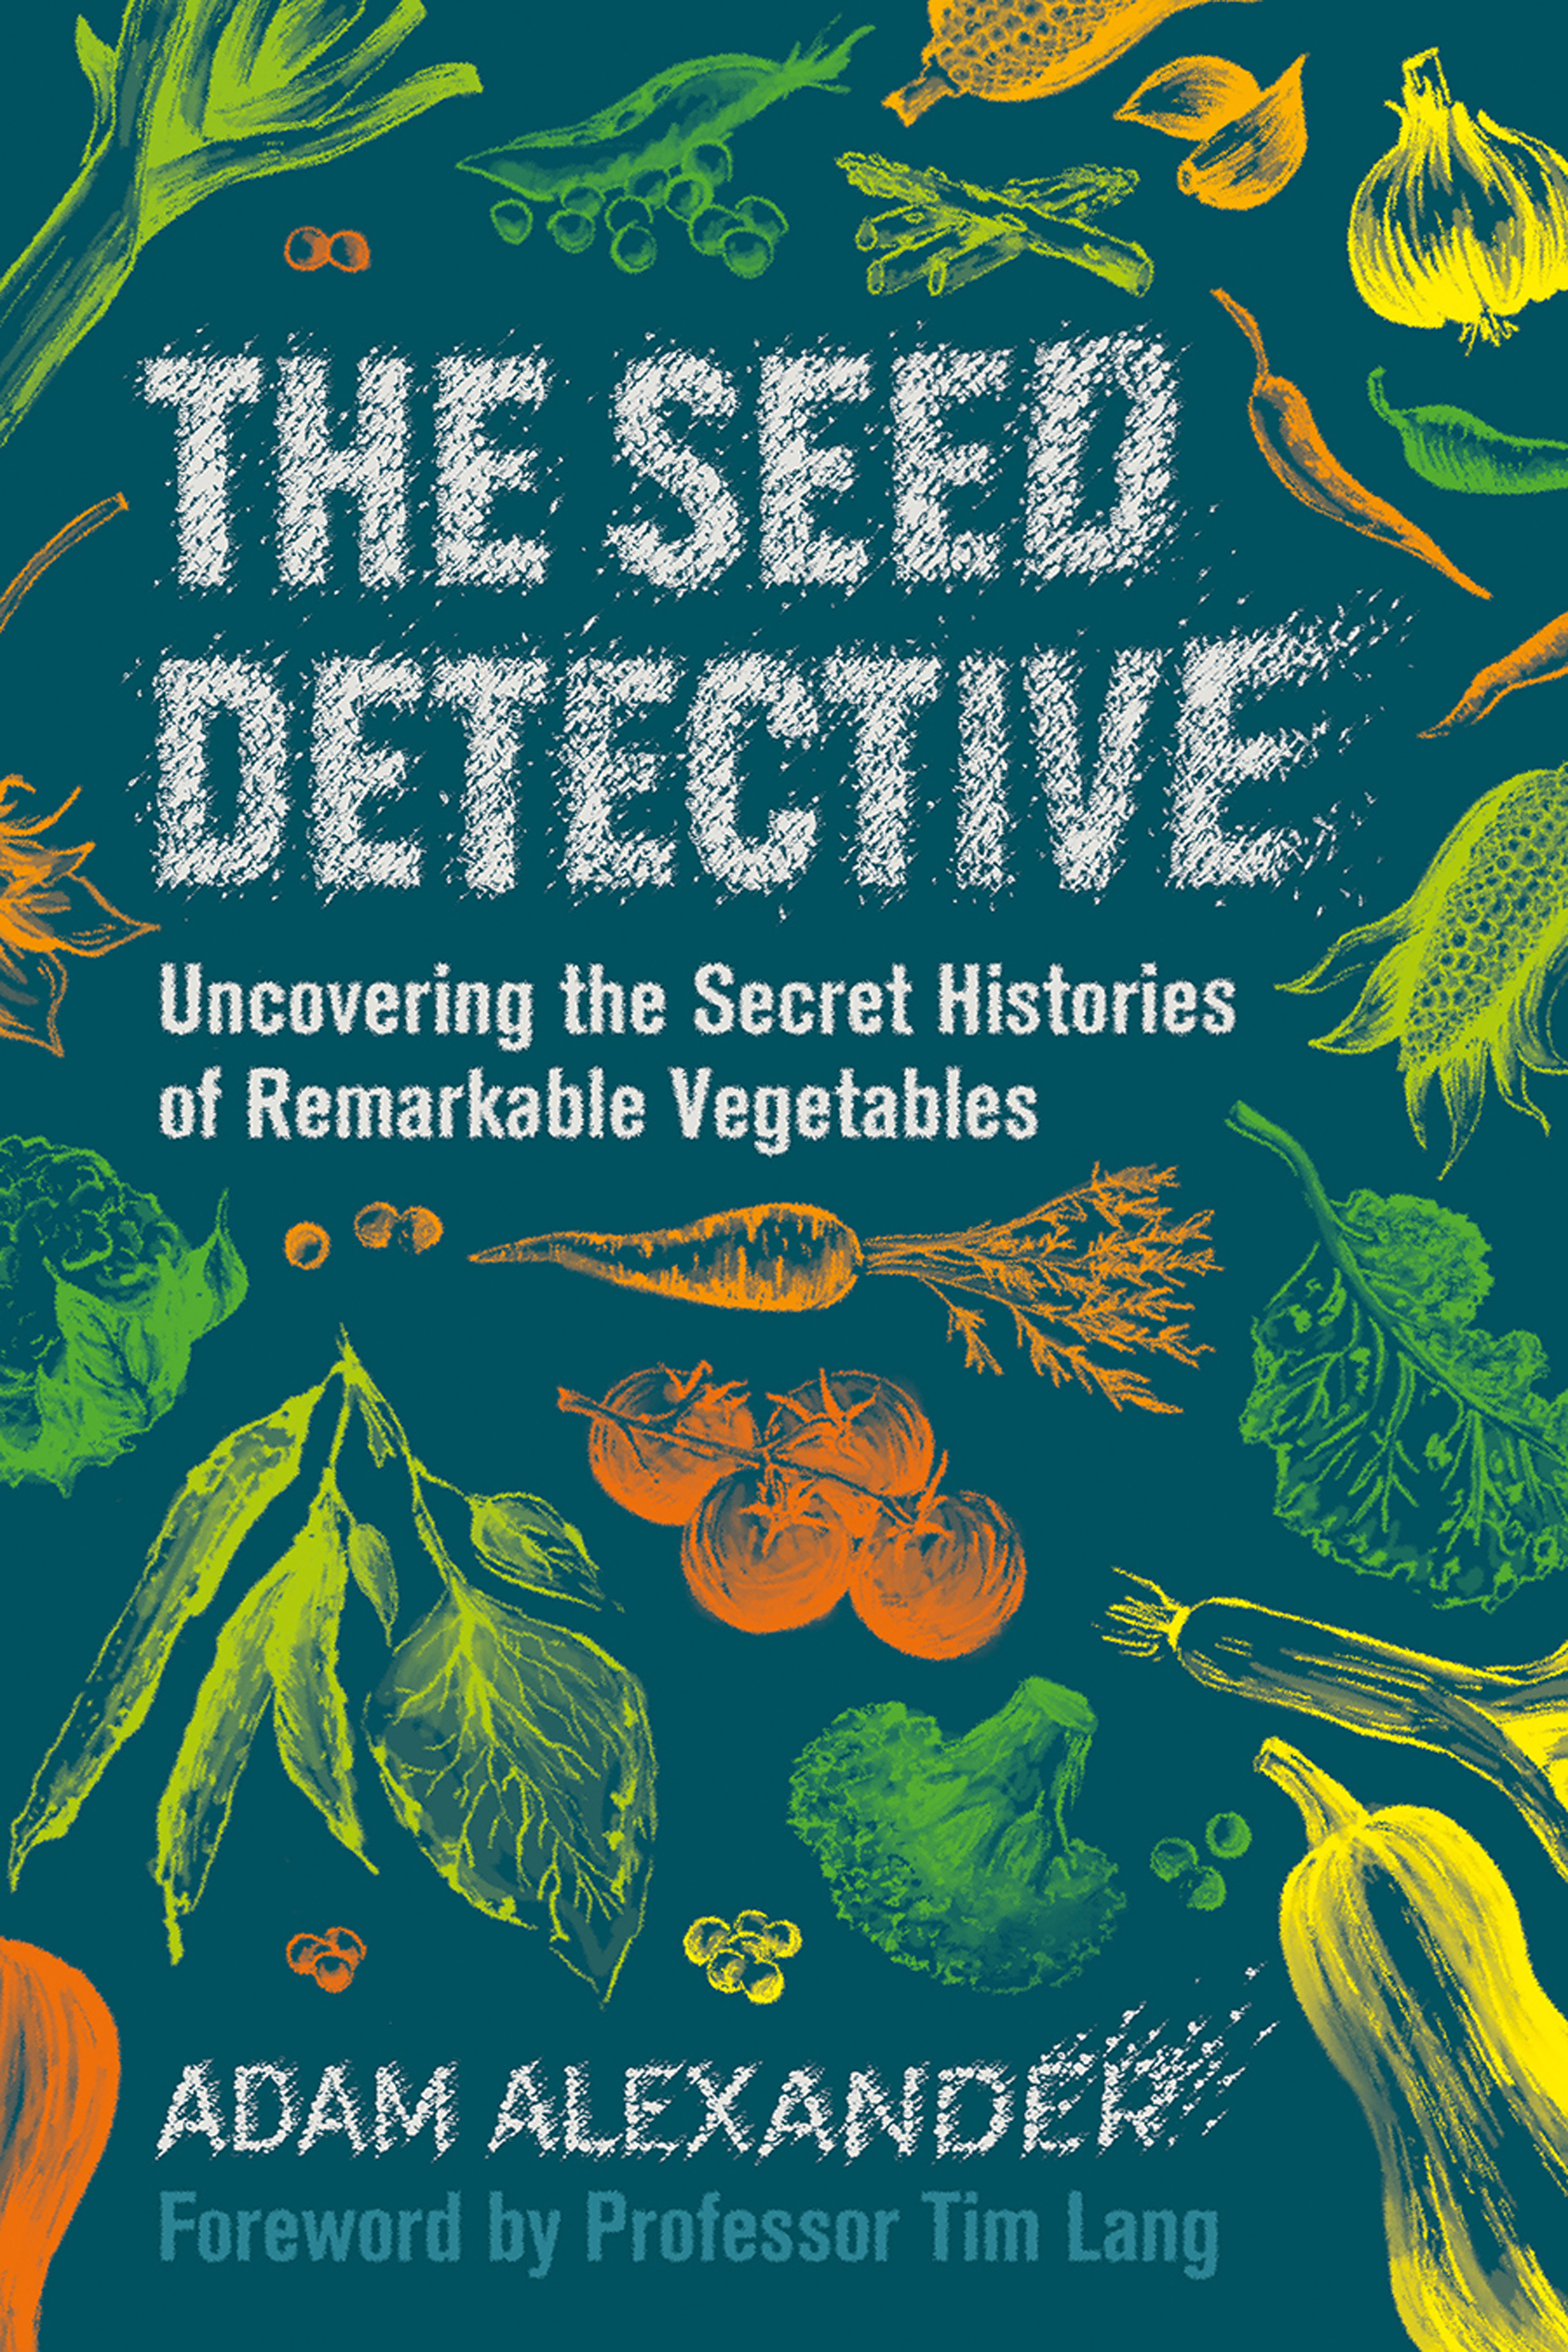 Book jacket of The Seed Detective by Adam Alexander (Chelsea Green/PA)